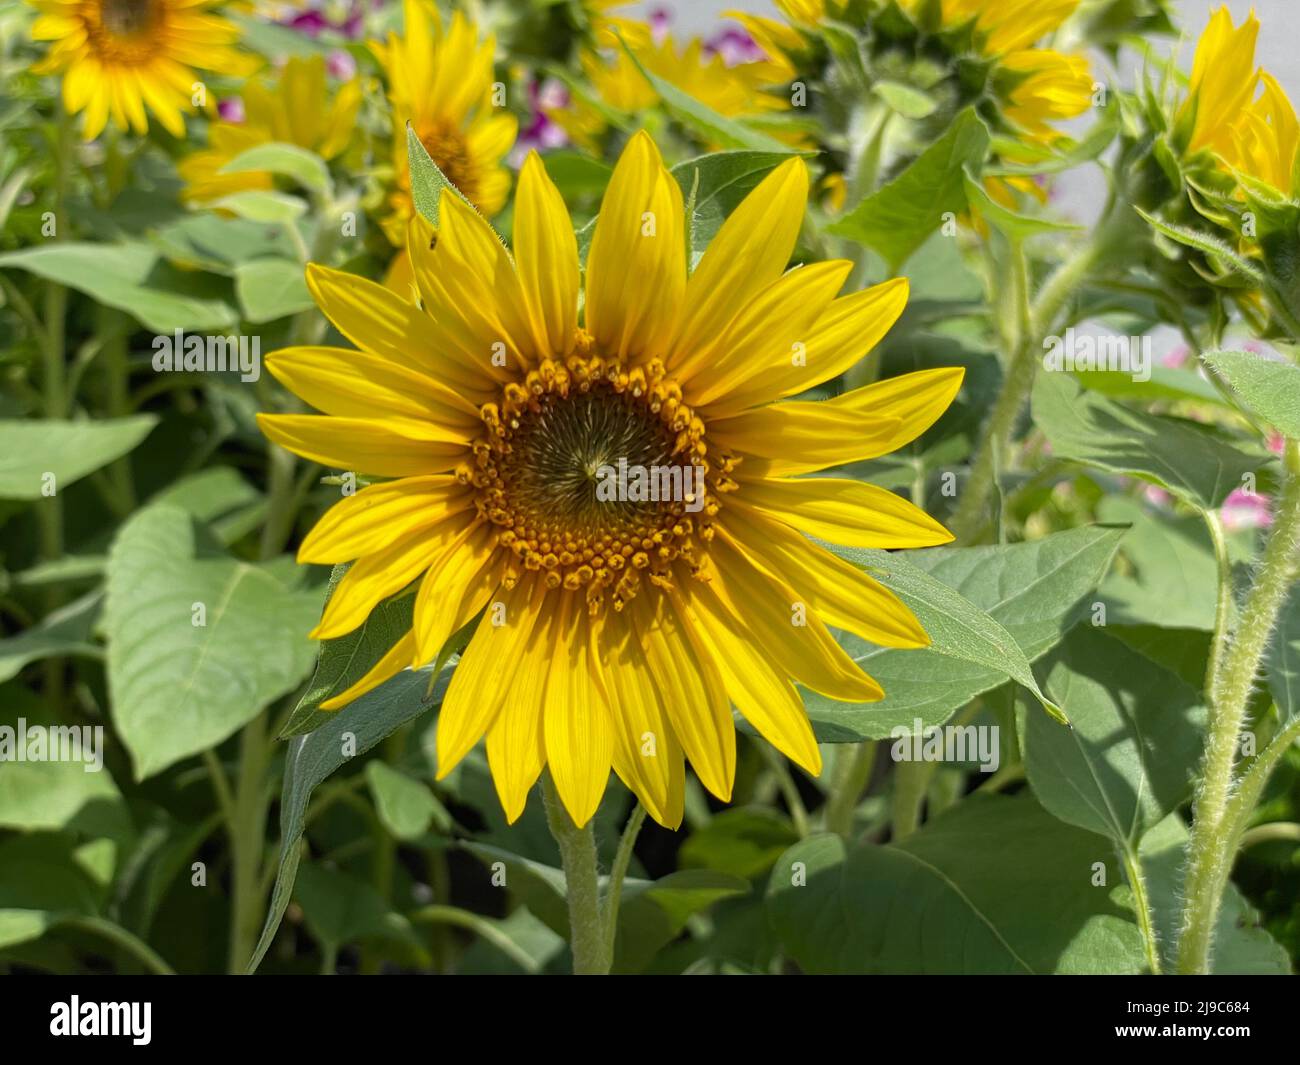 A brilliant sunflower in Japan Stock Photo